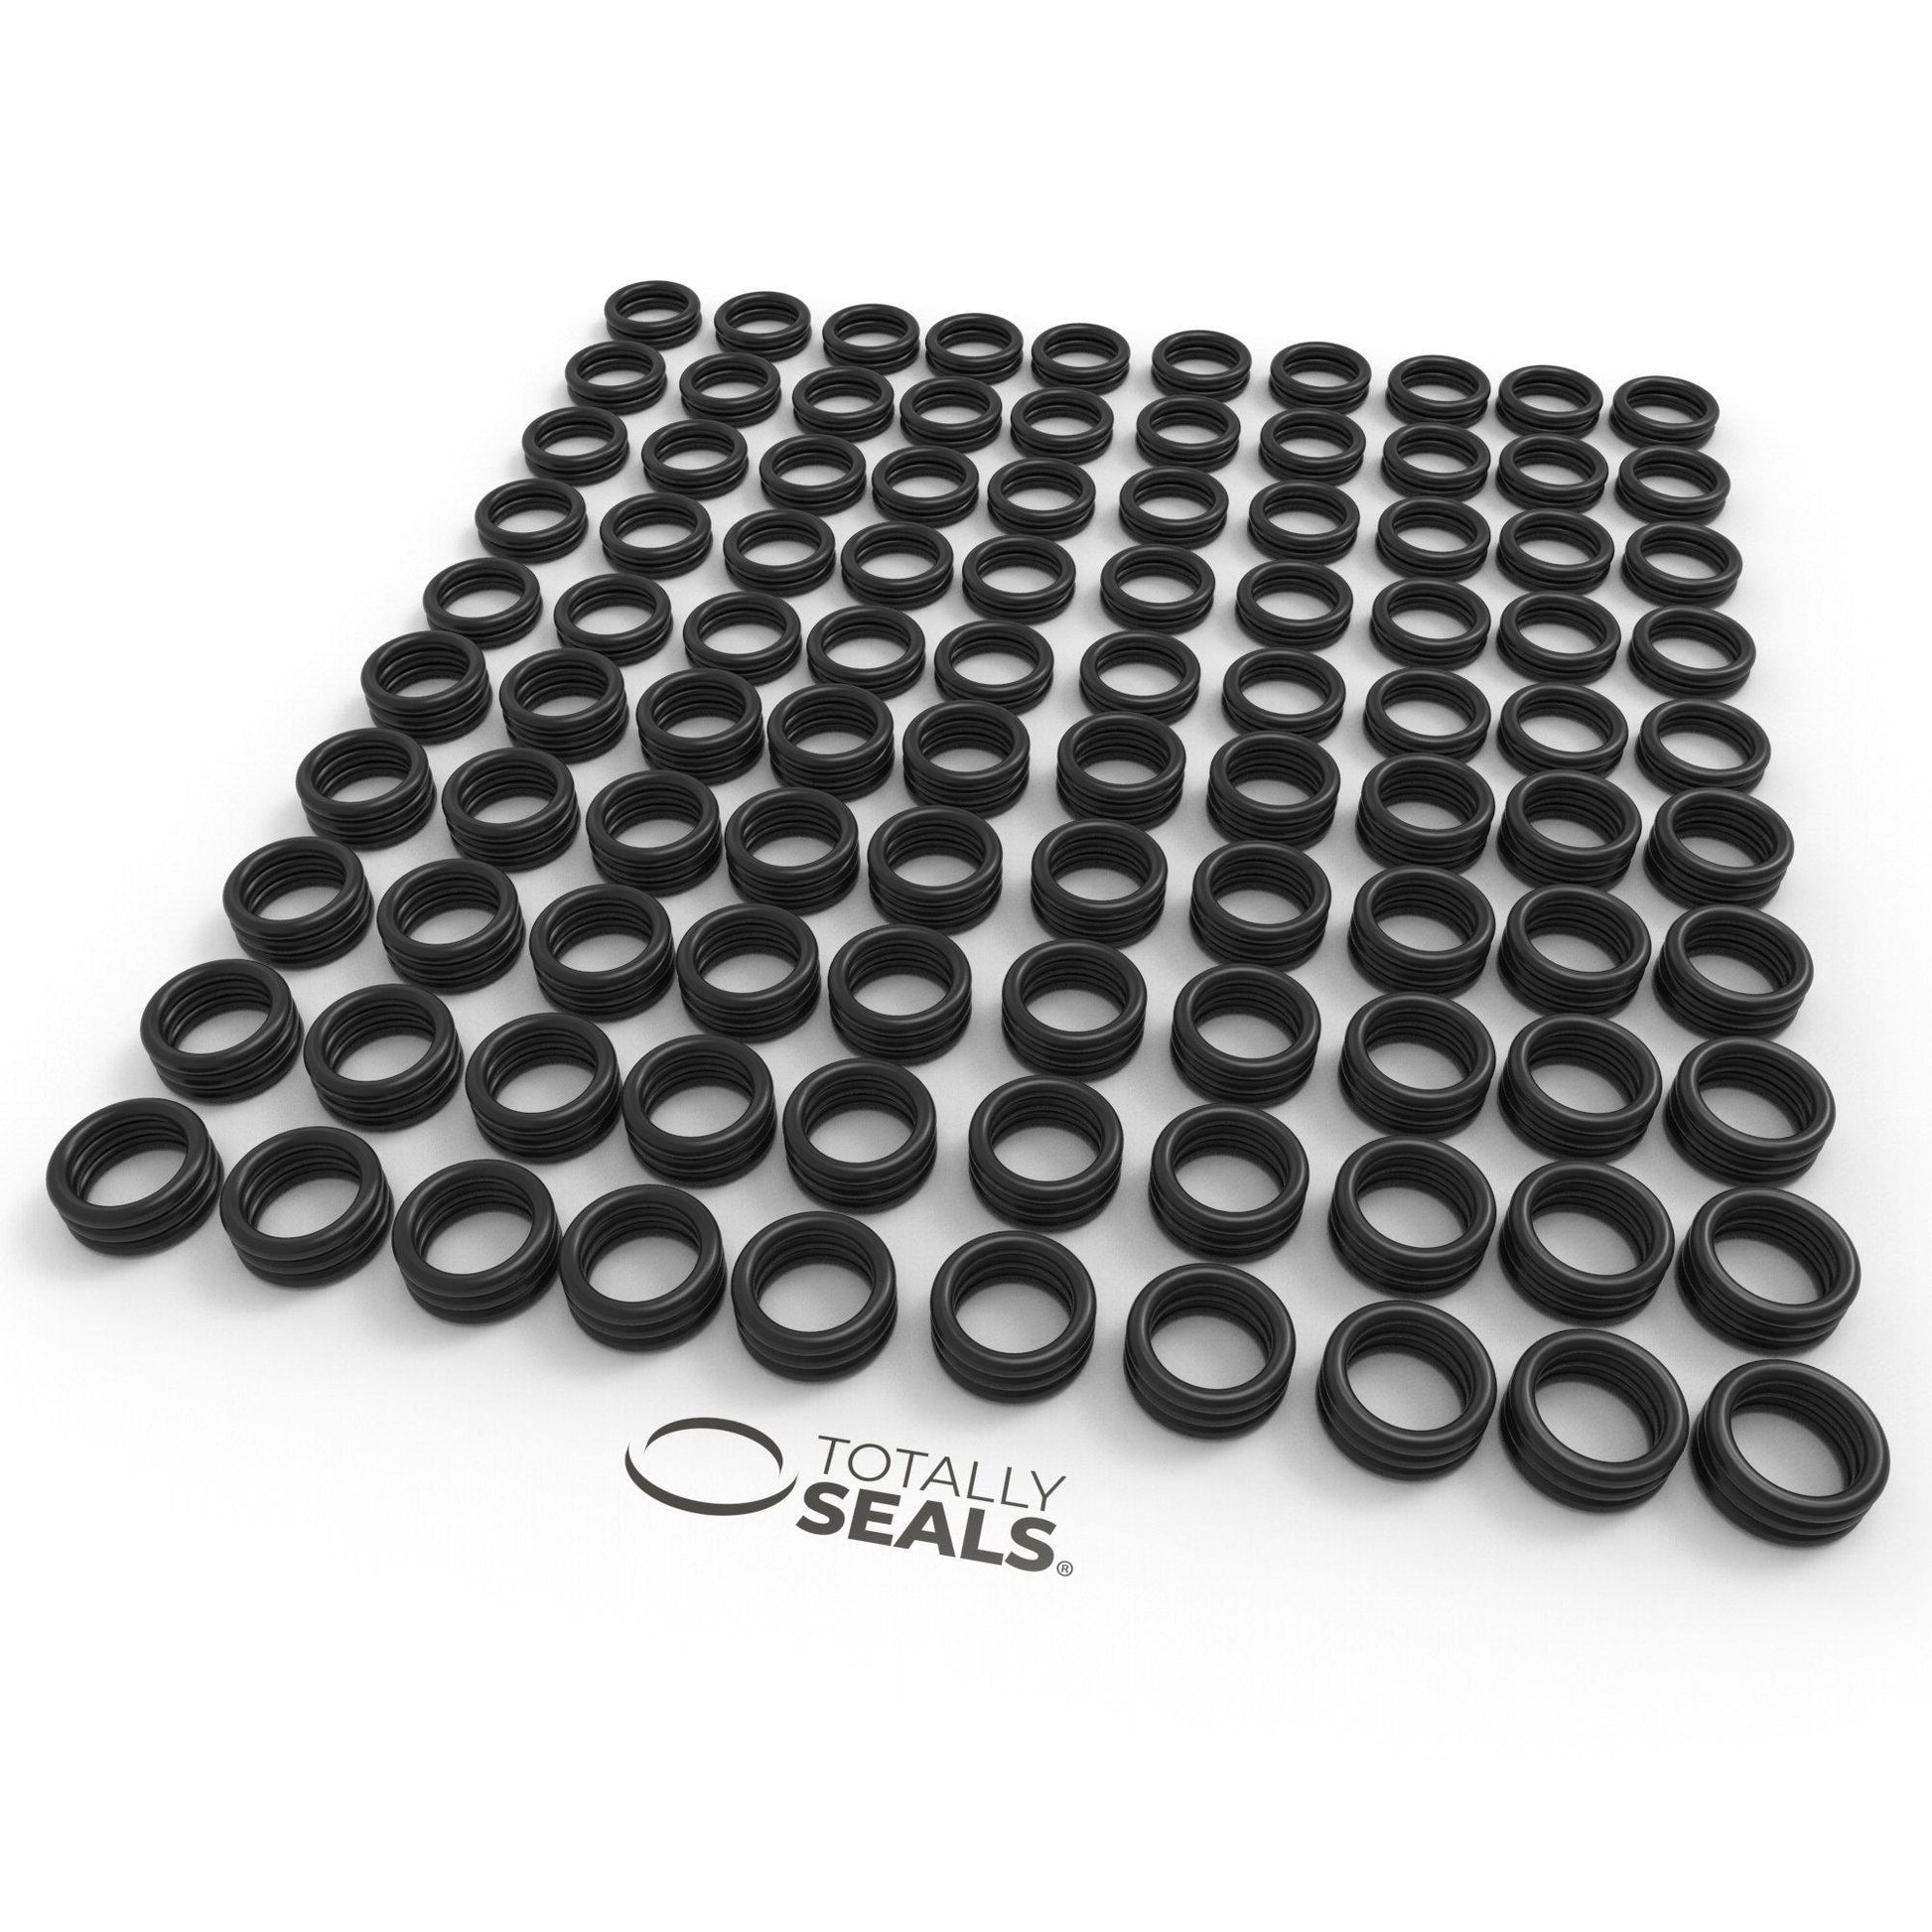 10mm x 1.5mm (13mm OD) Nitrile O-Rings - Totally Seals®